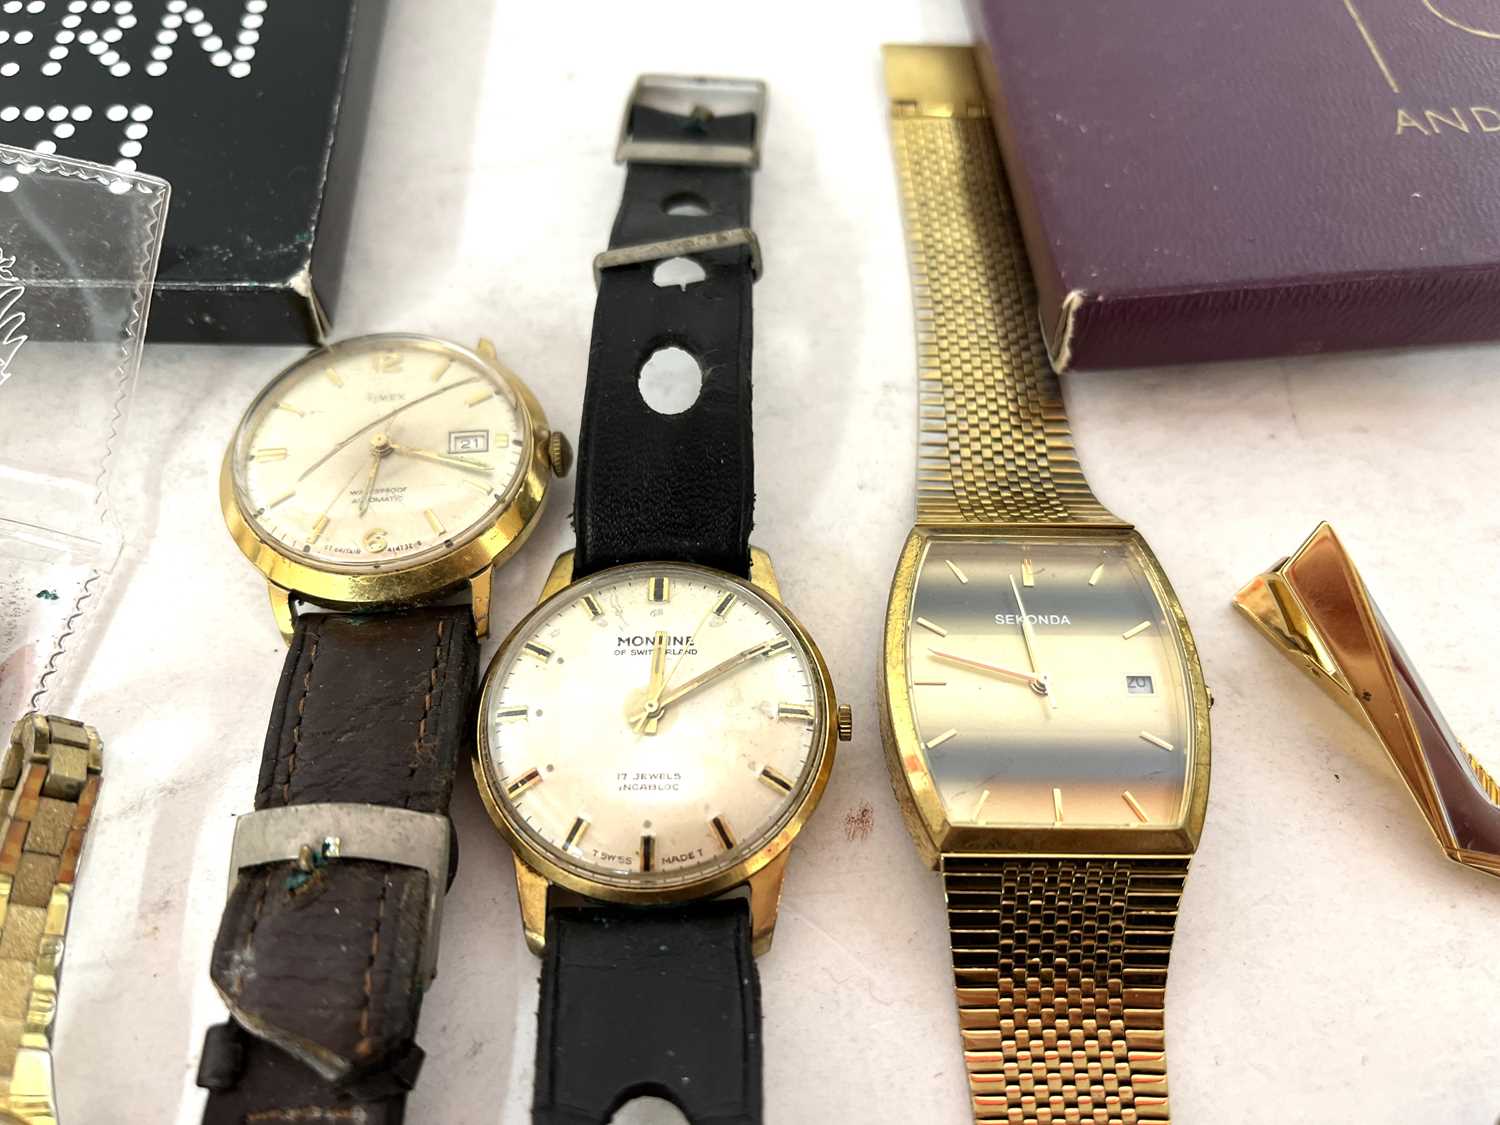 A mixed lot of wristwatches along with some coinage, makers of the watches include Timex, Montire - Image 4 of 4